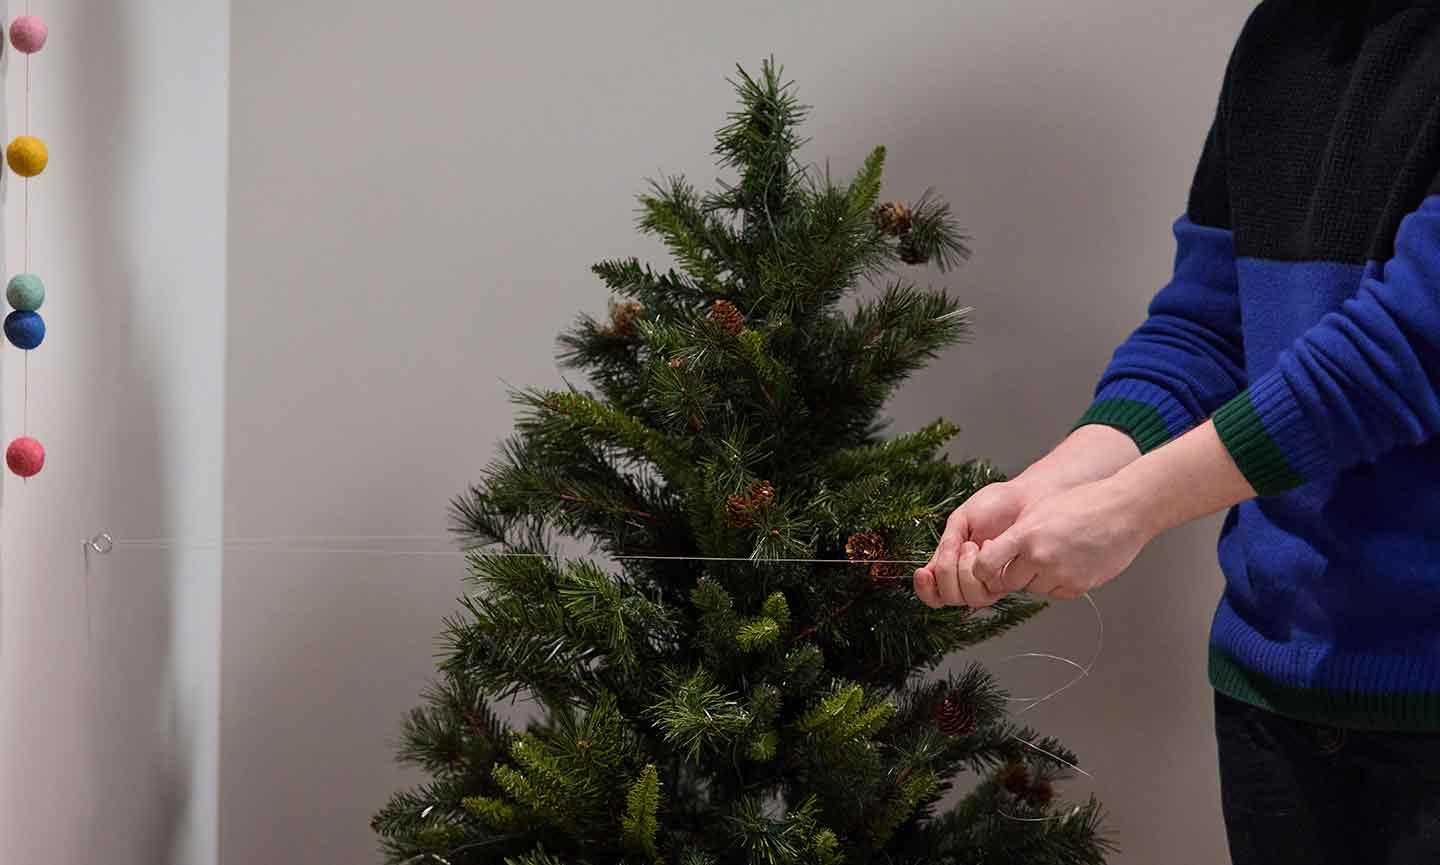 How to Cat-Proof Your Christmas Tree